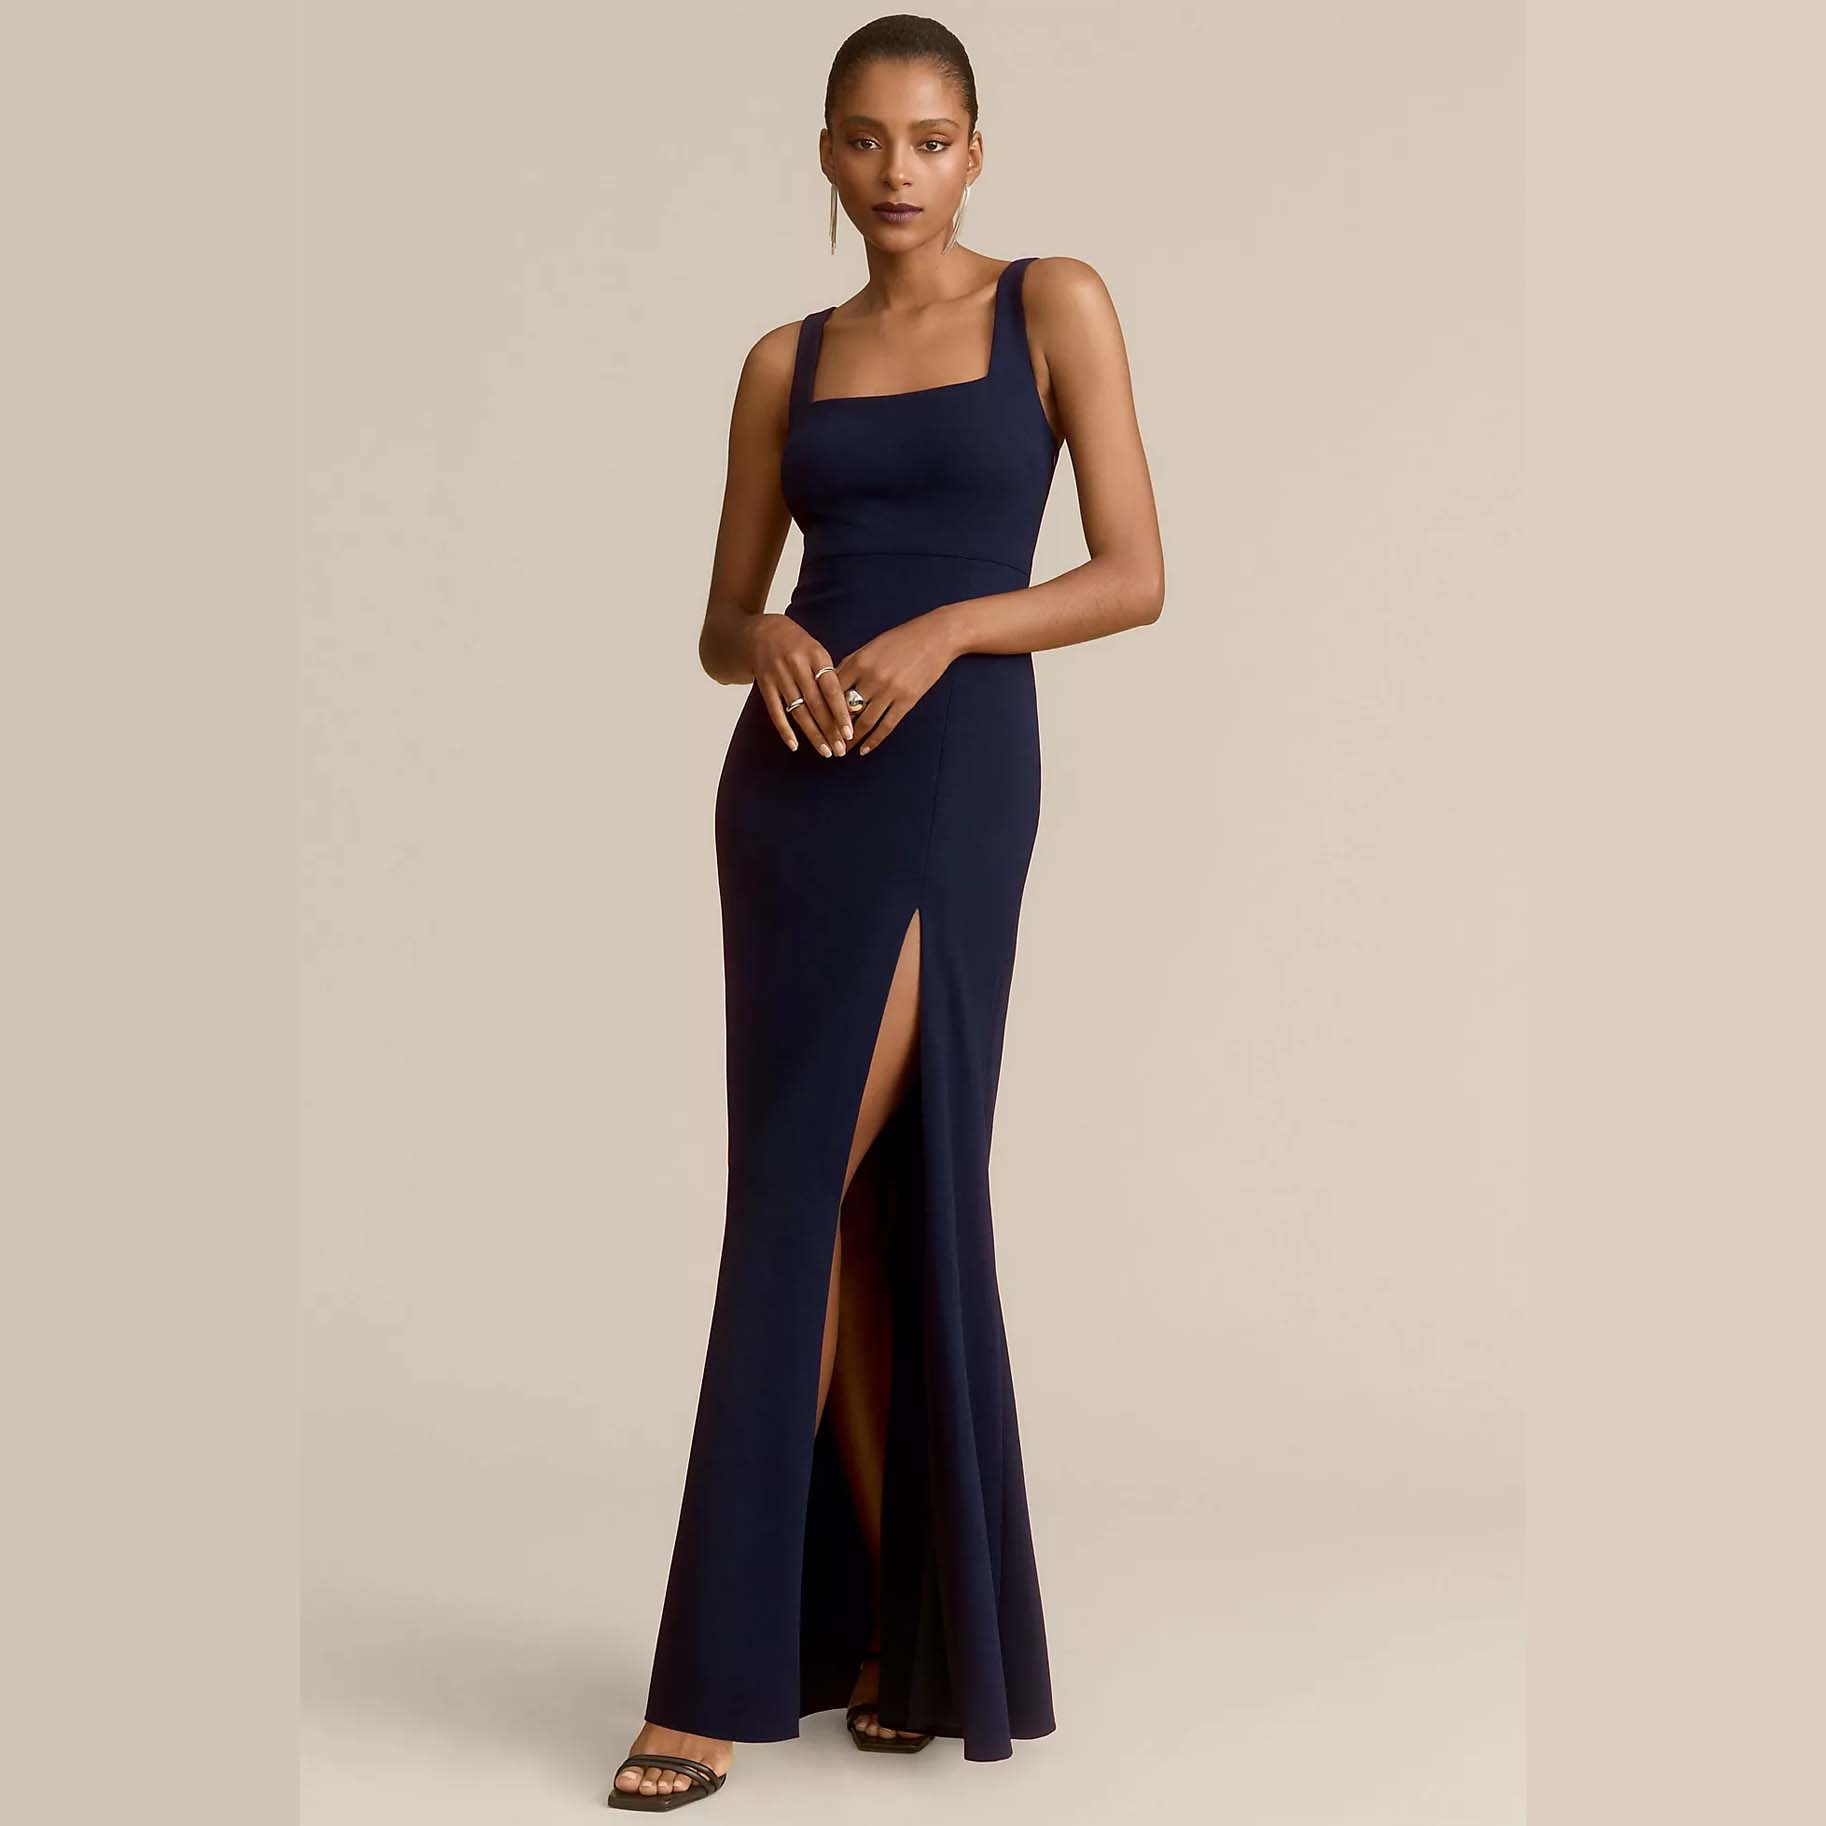 model wearing BHLDN Blake Square-Neck Stretch Crepe Gown in deep blue